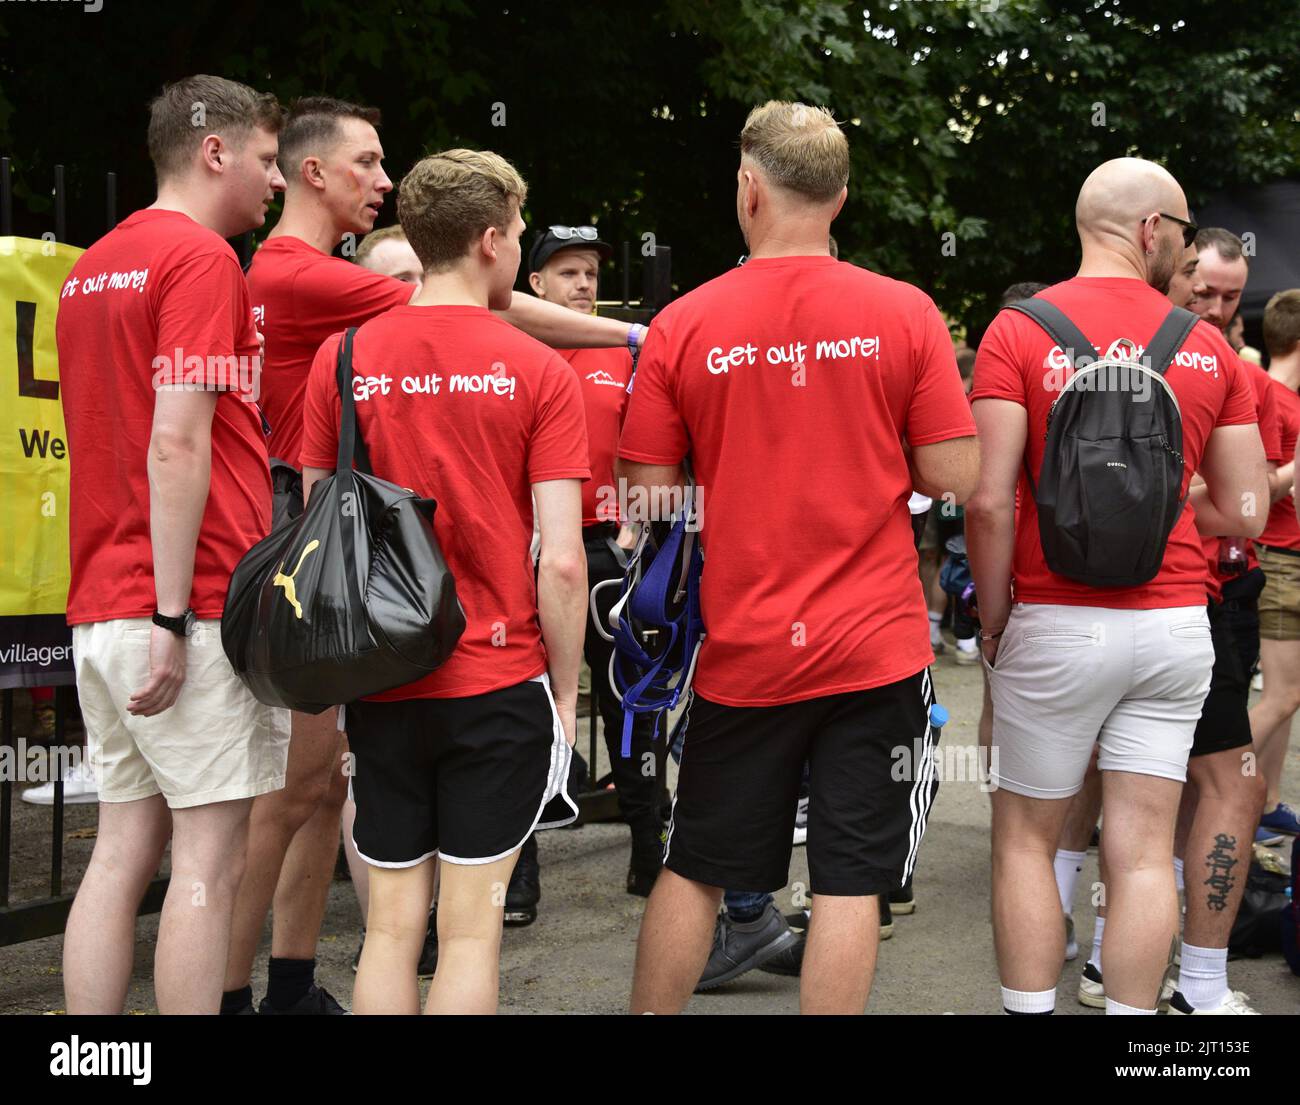 Manchester, UK. 27th August, 2022. Members of 'Outdoor Lads' group. Participants get ready to take part in the LGBTQ+ Pride parade, central Manchester, UK, as LGBTQ+ Pride continues over the Bank Holiday weekend 26th to 29th August. Organisers say: 'Manchester Pride is one of the UK's leading LGBTQ+ charities. Our vision is a world where LGBTQ+ people are free to live and love without prejudice. We’re part of a global Pride movement celebrating LGBTQ+ equality and challenging discrimination.' Credit: Terry Waller/Alamy Live News Stock Photo